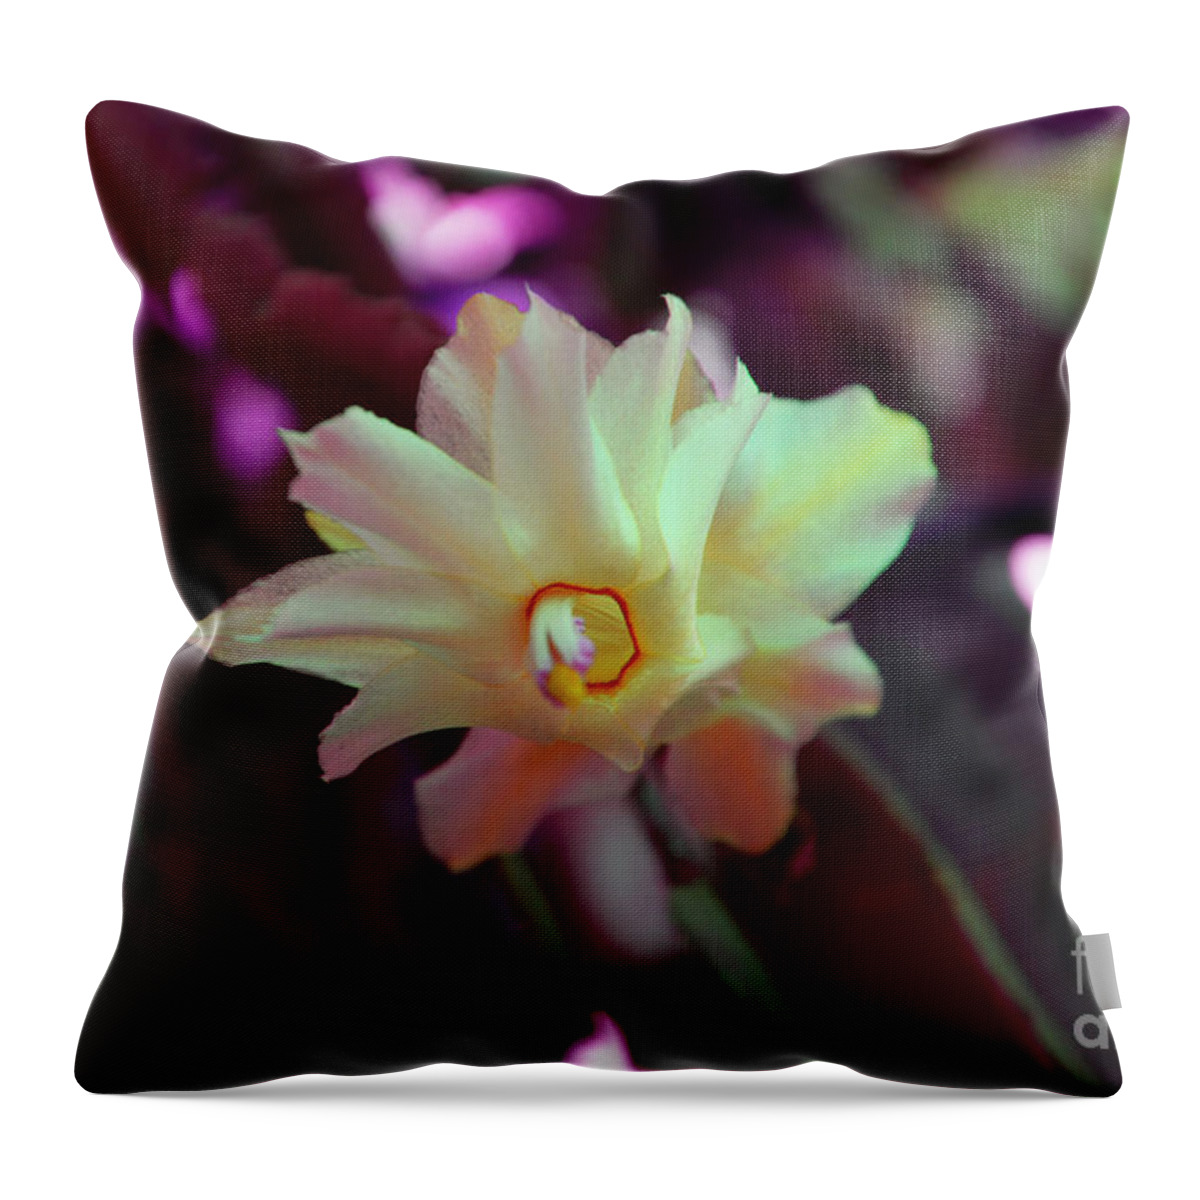 Cactus Throw Pillow featuring the photograph Christmas Cactus Flower by Ramona Matei